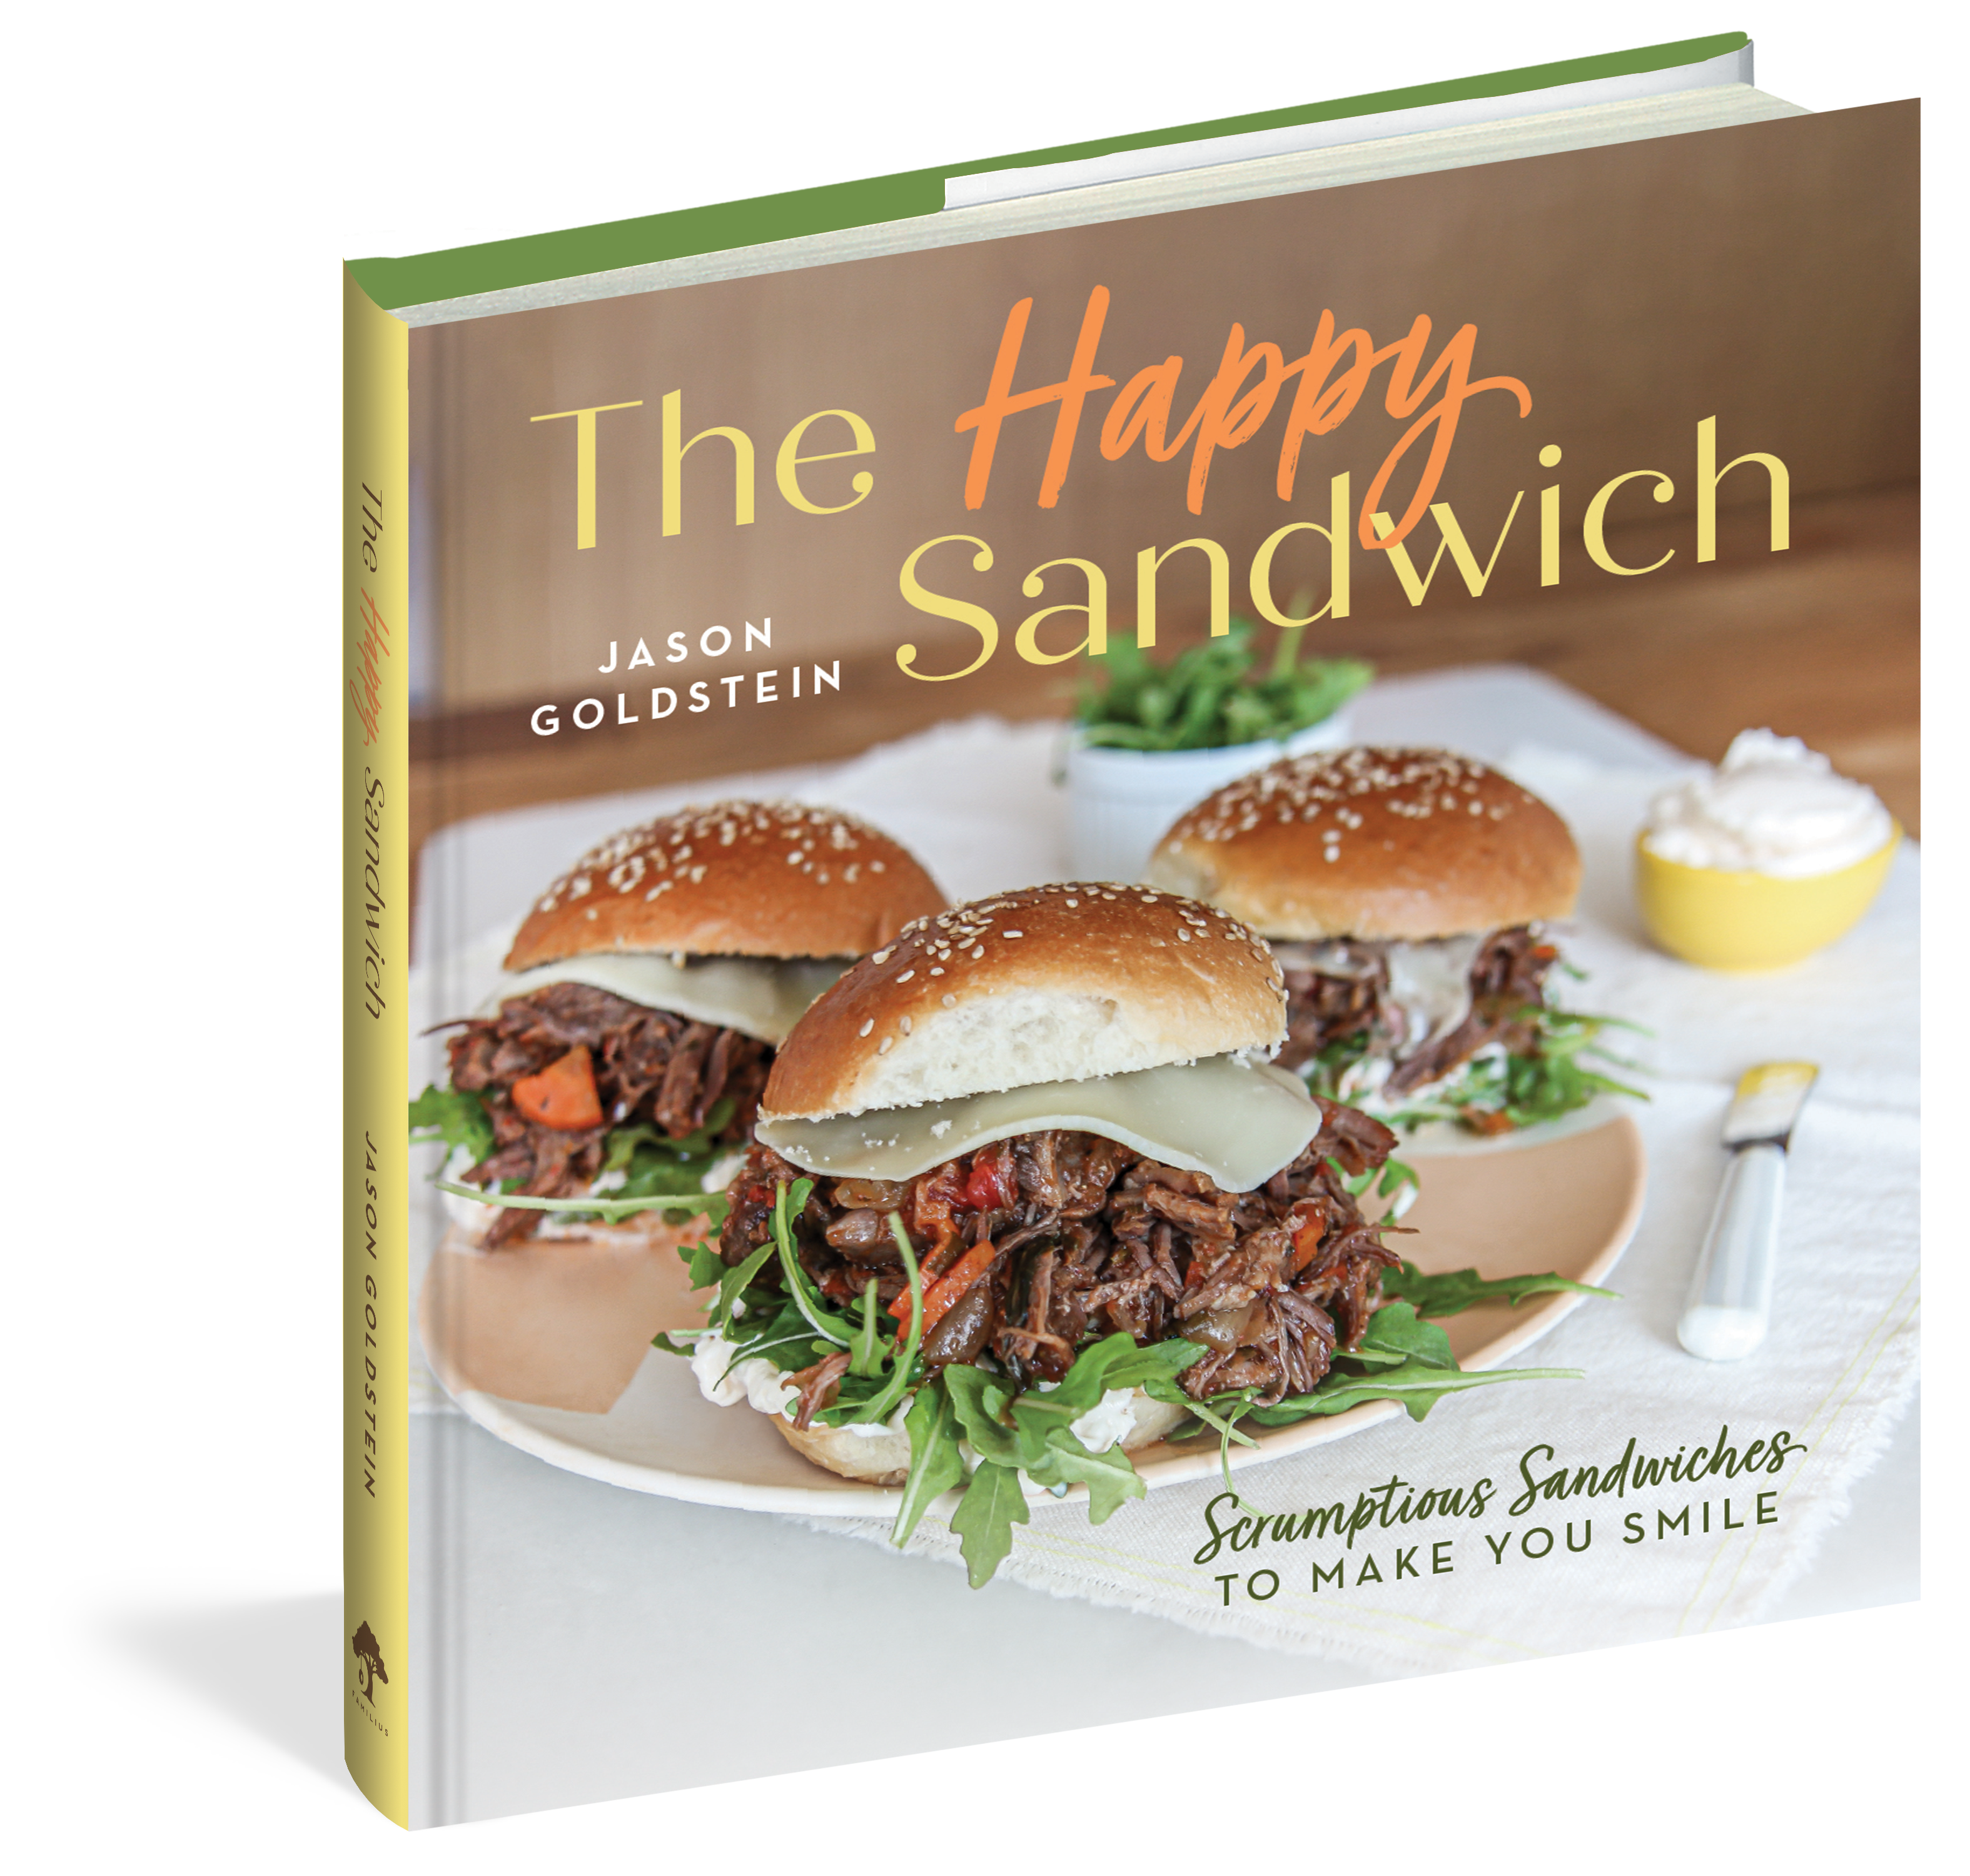 The cover of the cookbook The Happy Sandwich.